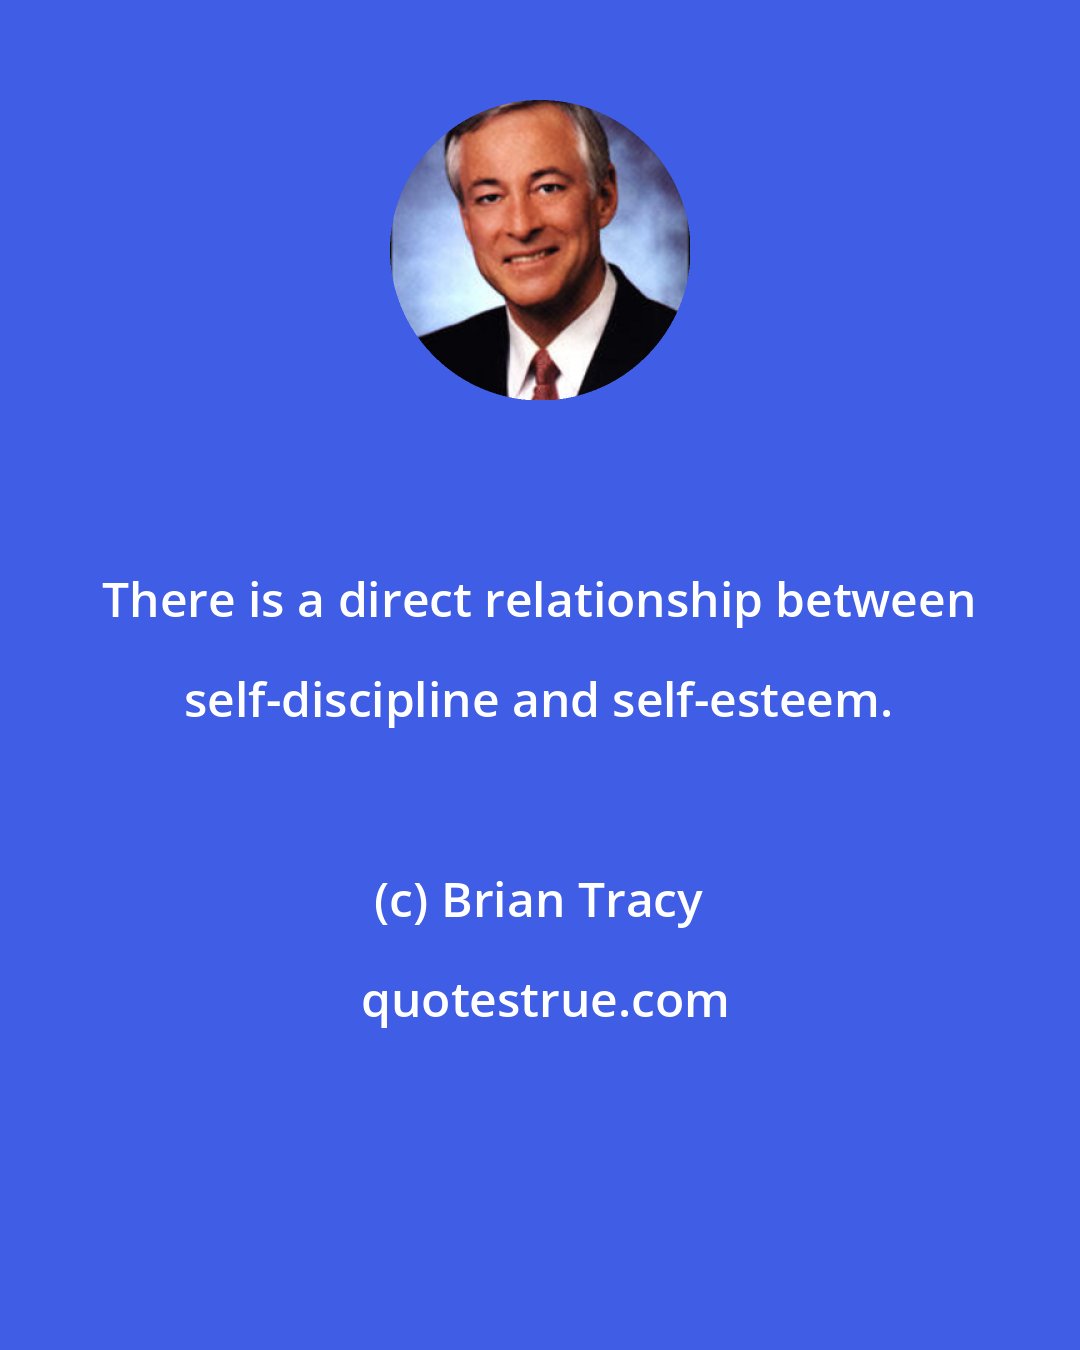 Brian Tracy: There is a direct relationship between self-discipline and self-esteem.